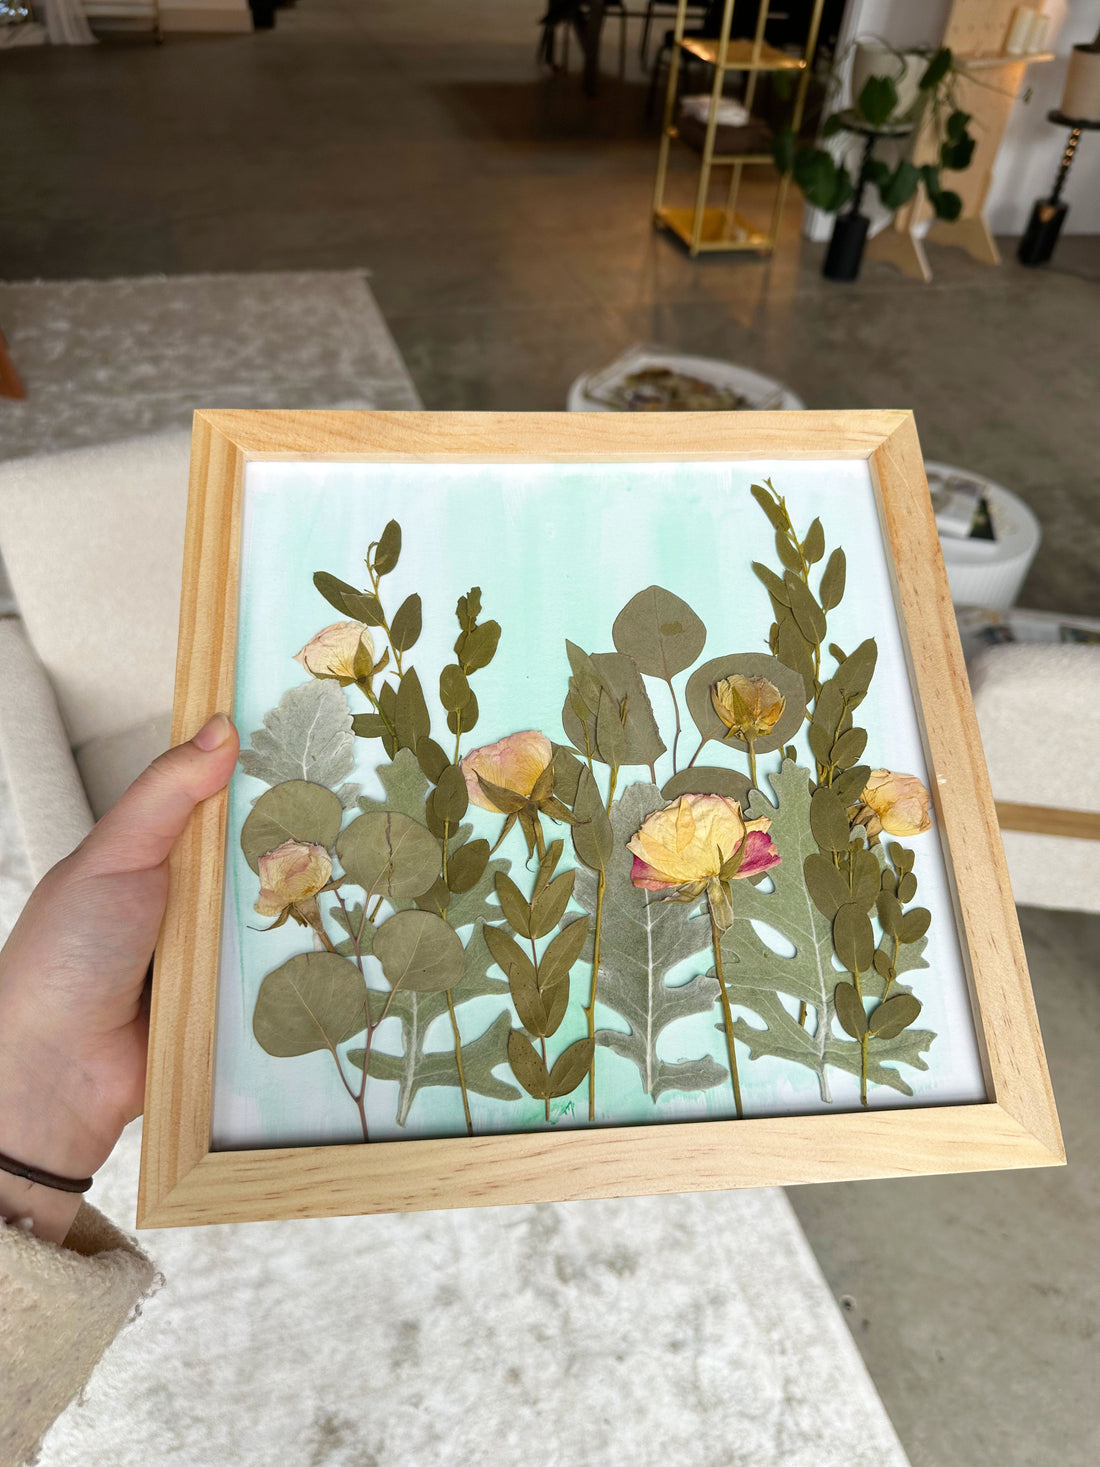 Person holding a tan colored frame that has pressed flowers in a field style design in their home.